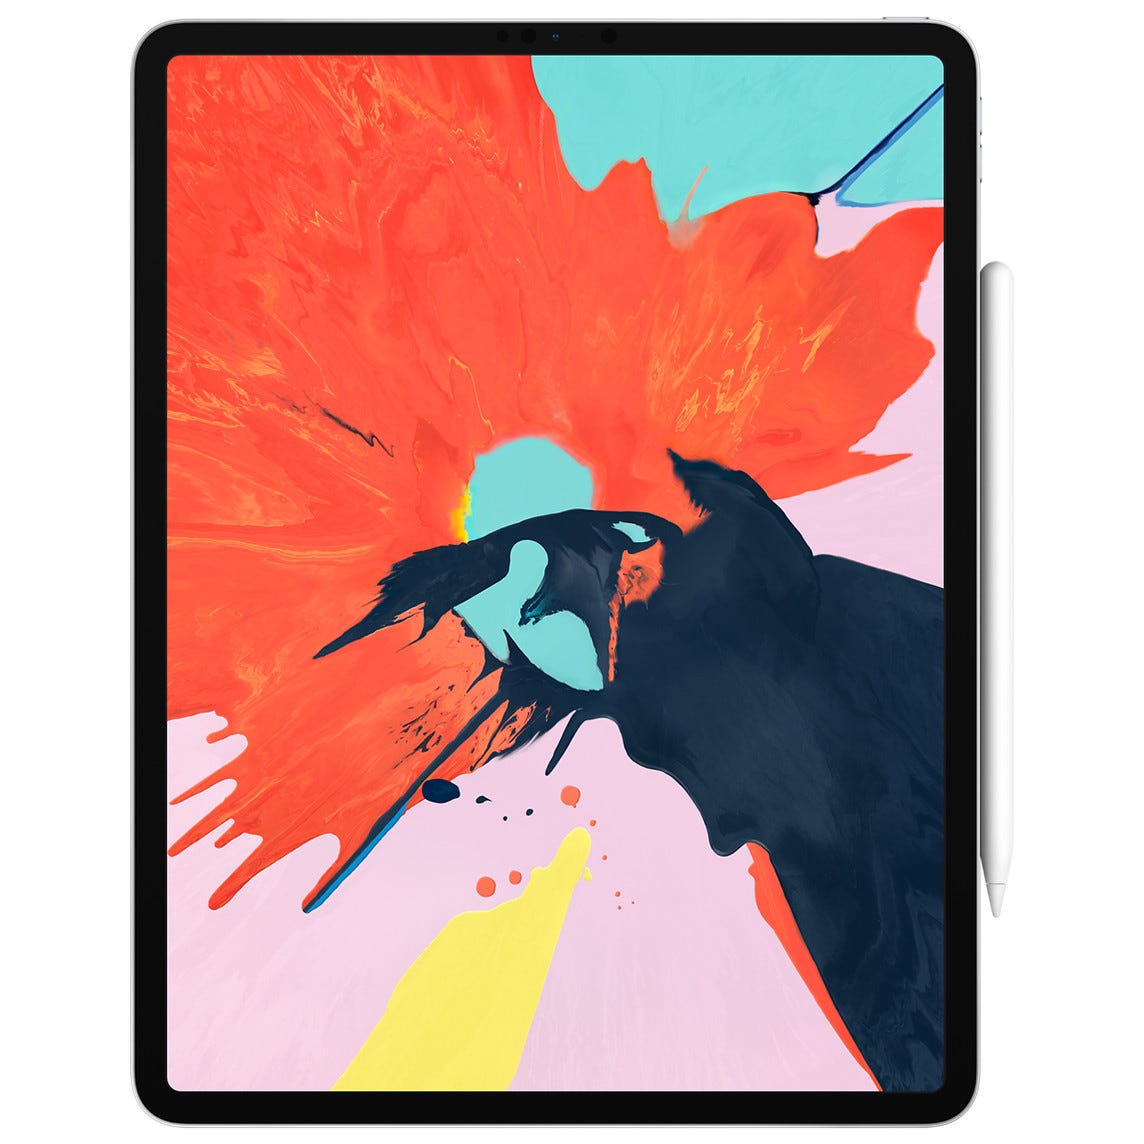 Rumor has it that Apple will release larger OLED iPad Pro models in